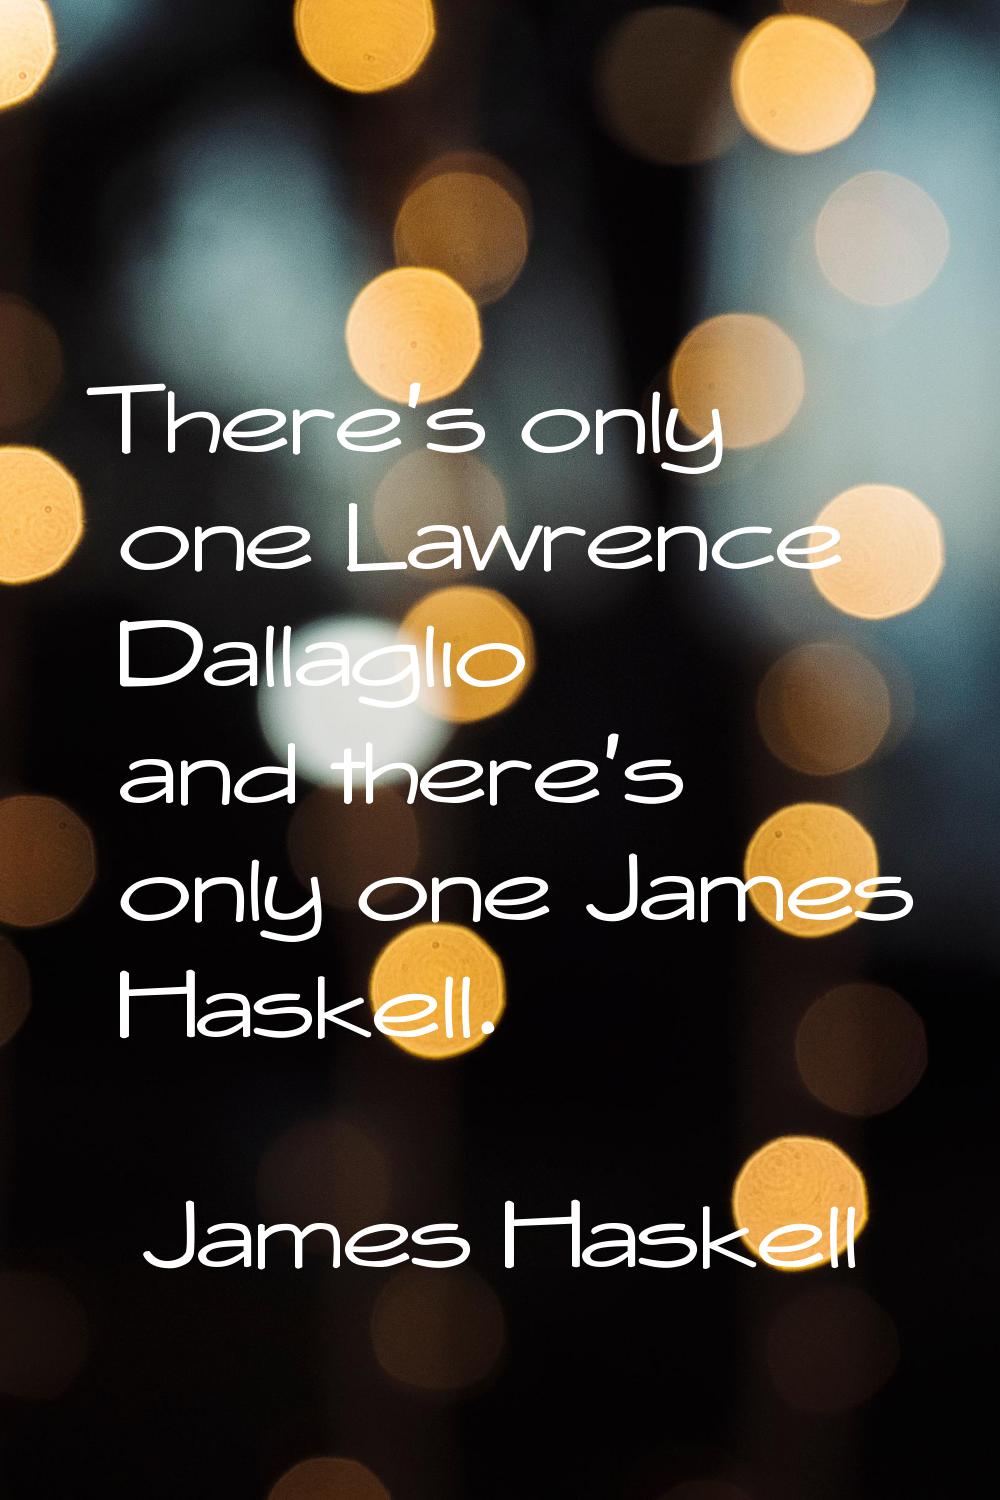 There's only one Lawrence Dallaglio and there's only one James Haskell.